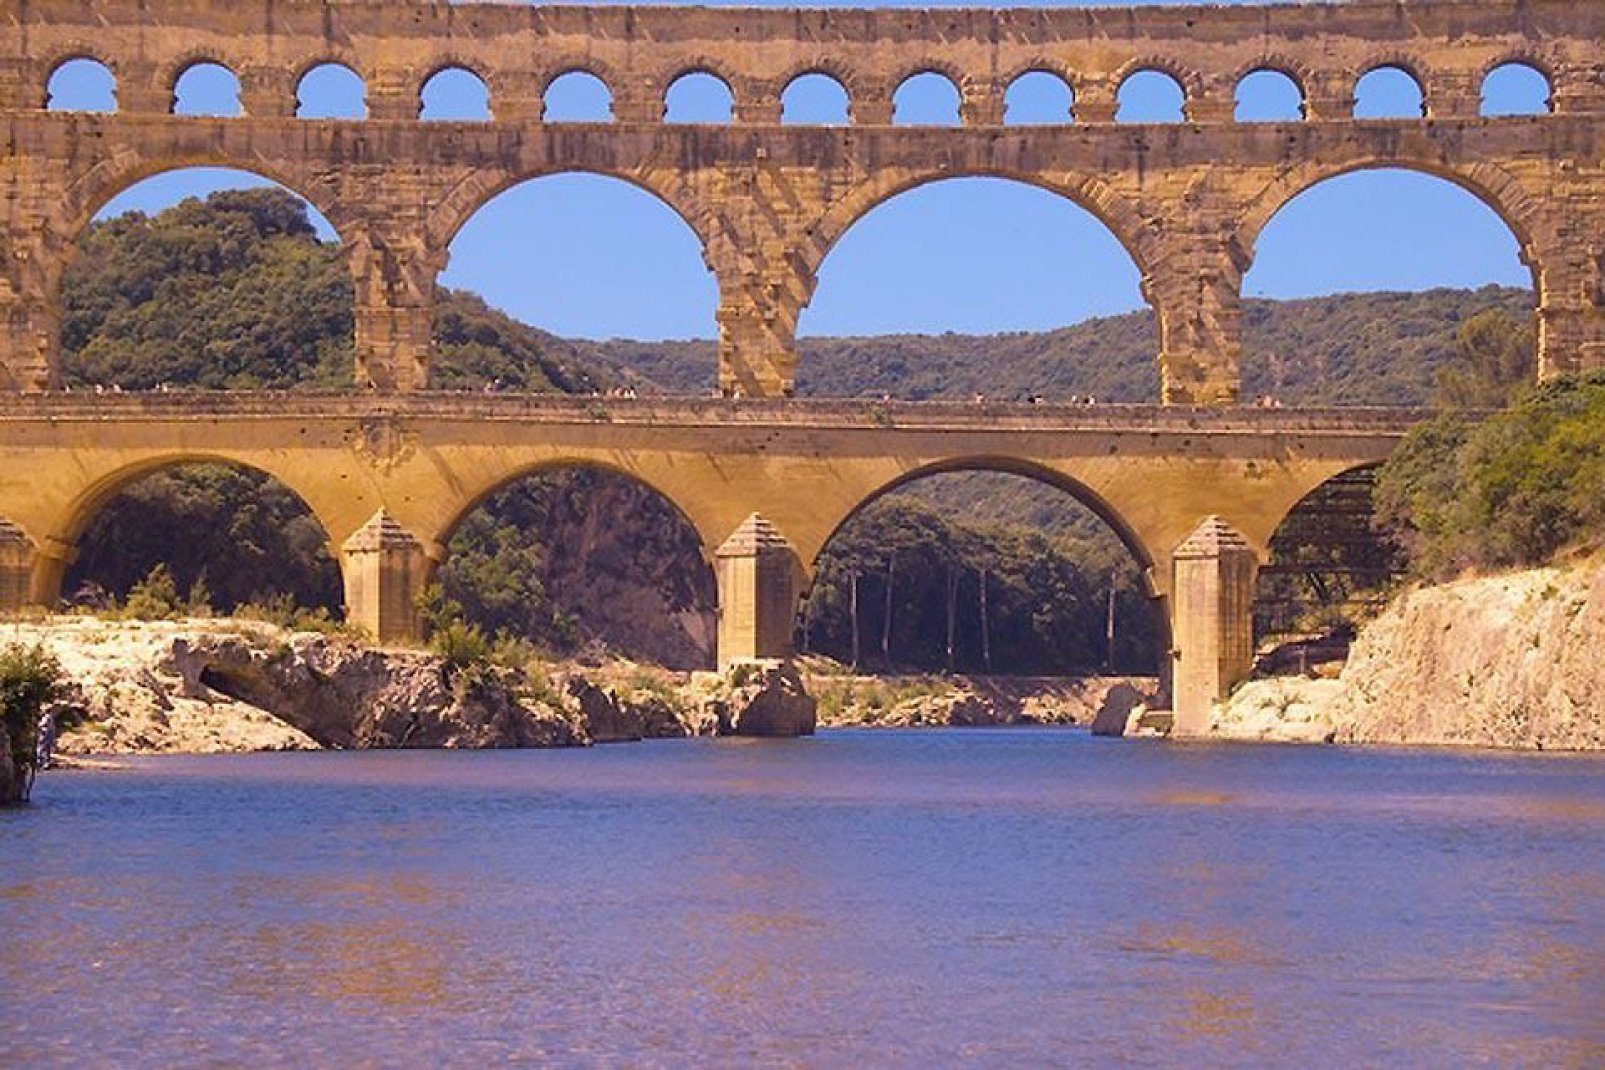 This aqueduct bridge dates back to Roman times. It has three different levels, the highest of which is 7.4m tall.